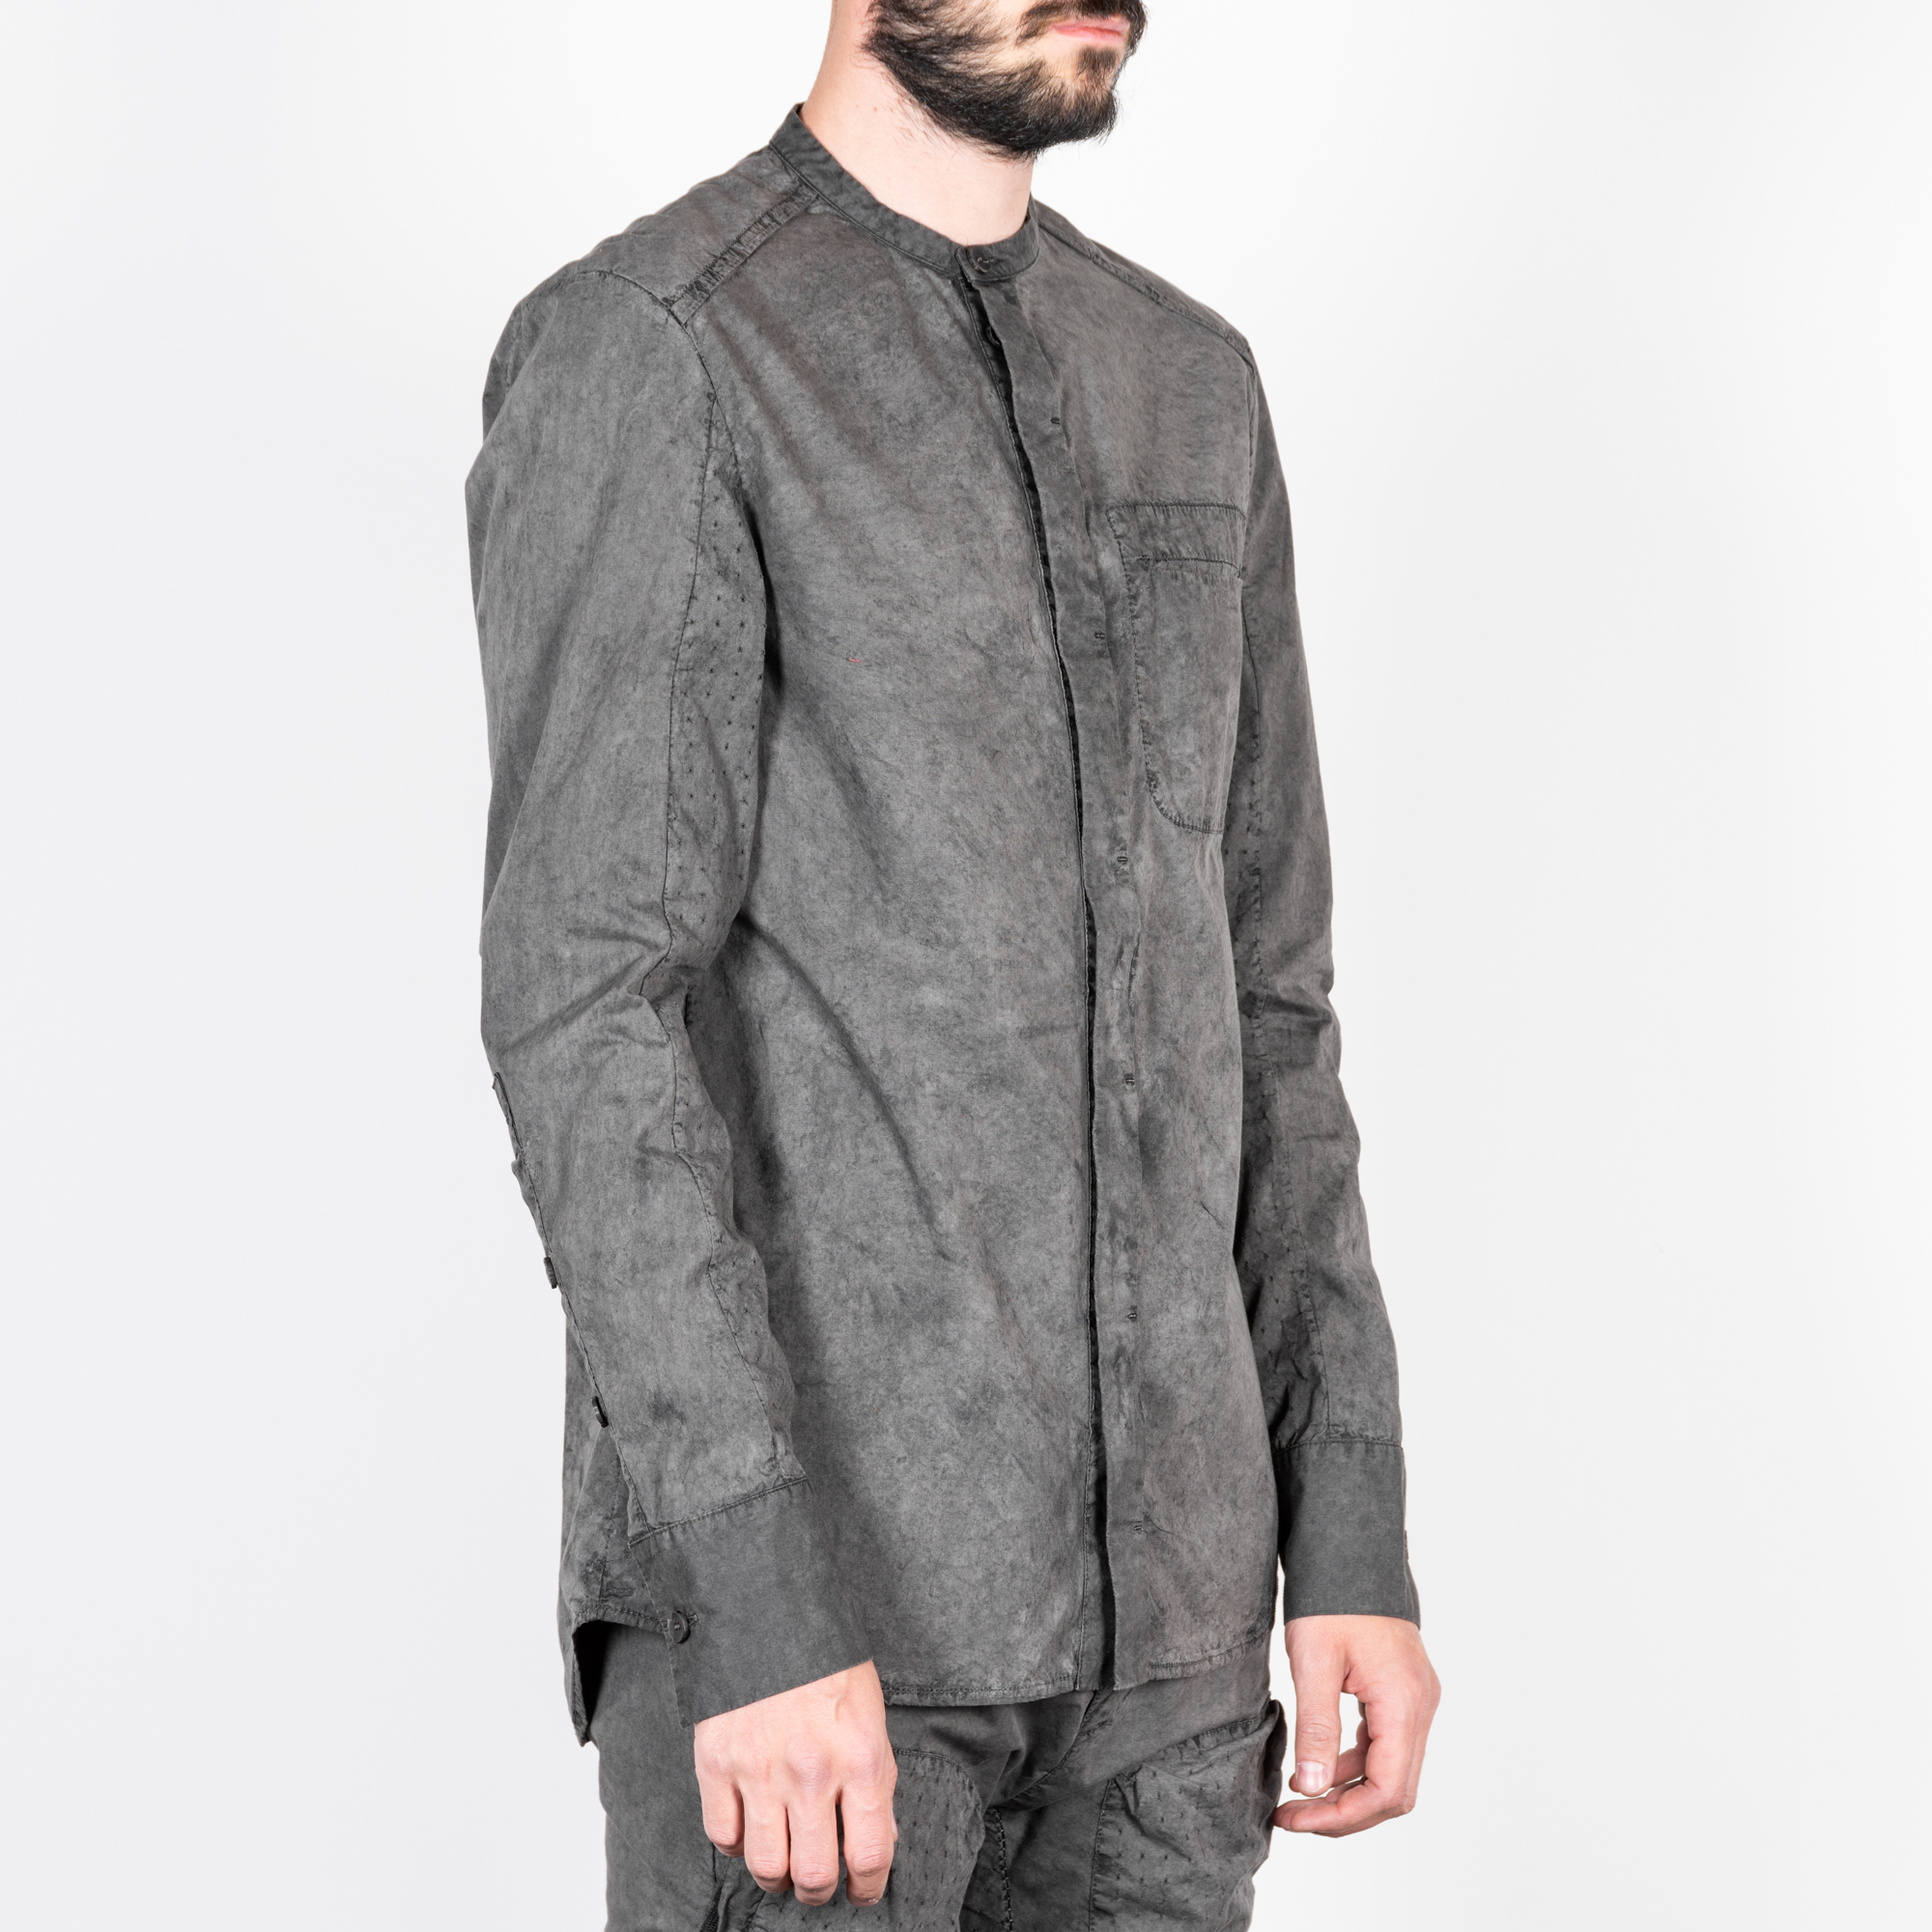 STORM GREY PUNCHED OUT STAND COLLAR SHIRT|wolfensson